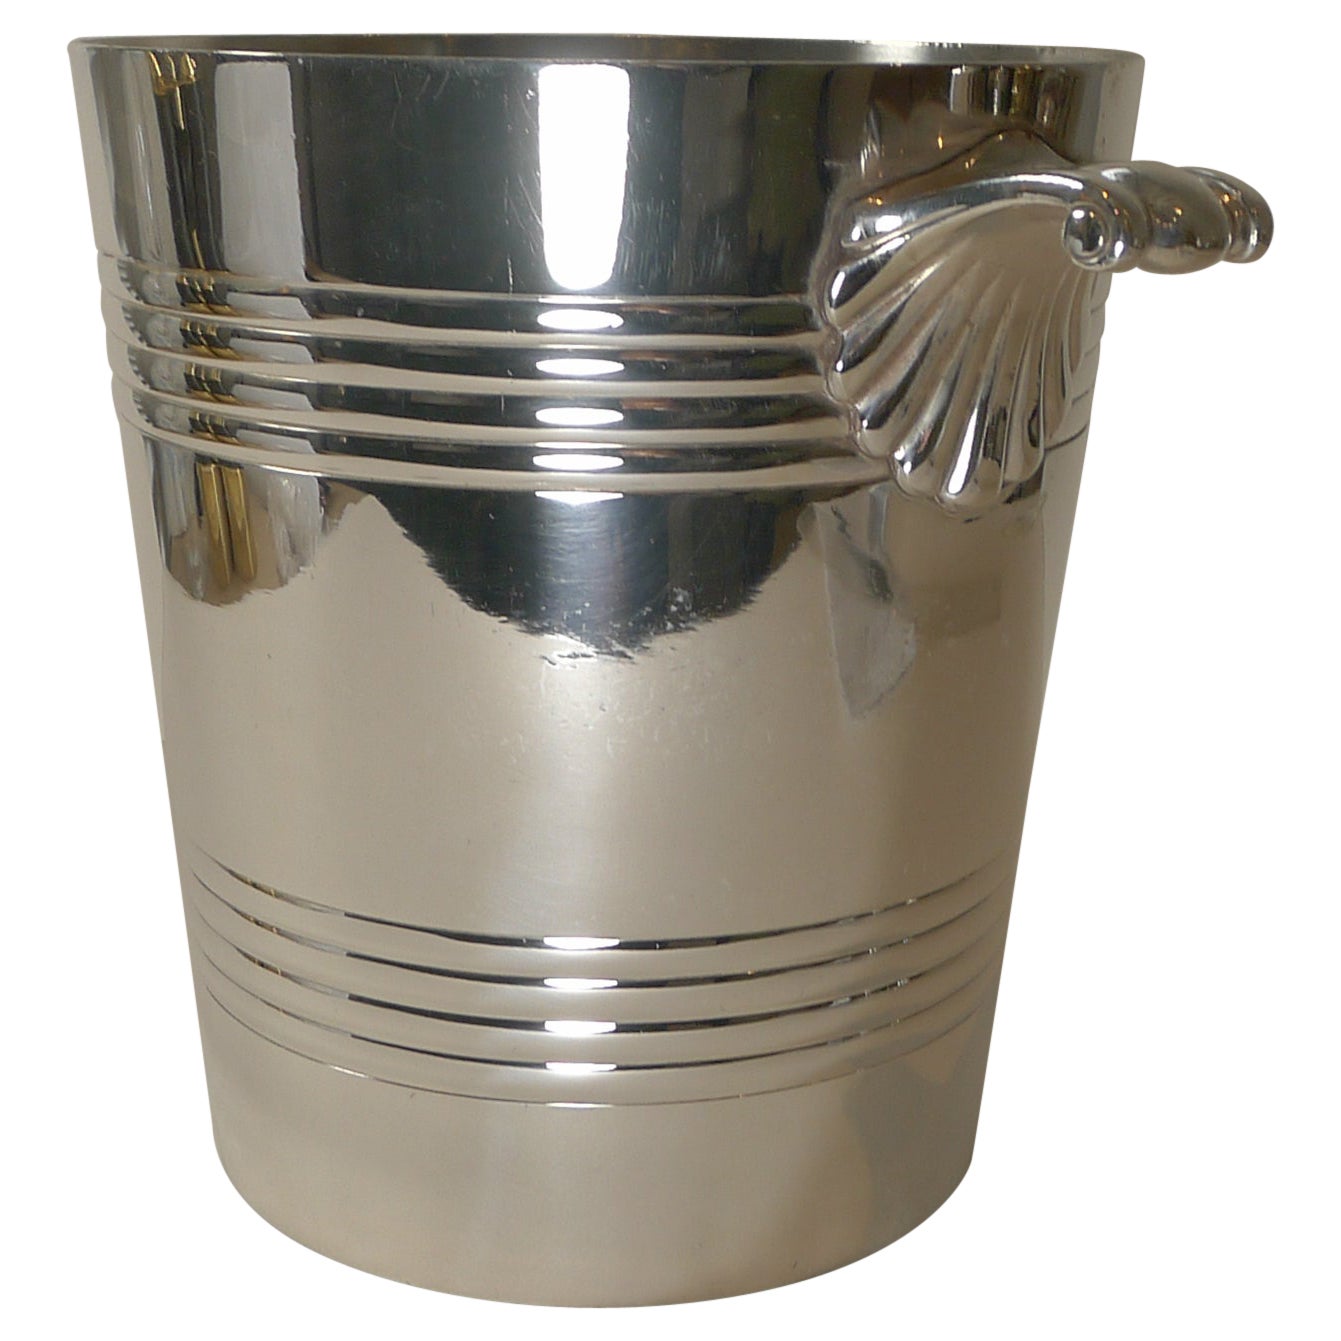 Silver Plated Wine Cooler / Champagne Bucket by Wiskemann, Belgium c.1930